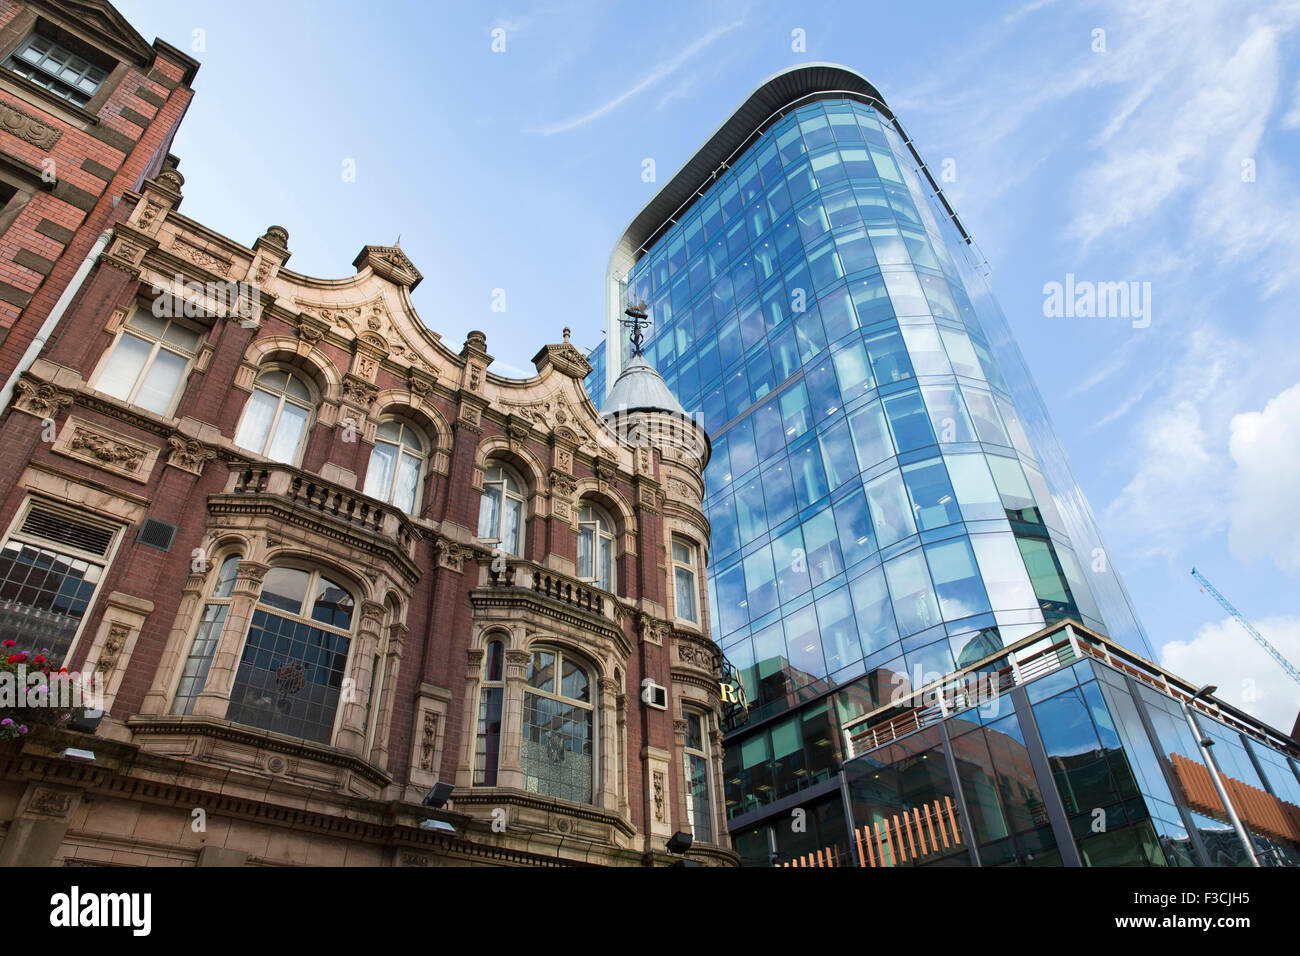 Old and new buildings in Birmingham City Centre pictured at the crossing of Church Street and Cornwall Street, Birmingham. Stock Photo